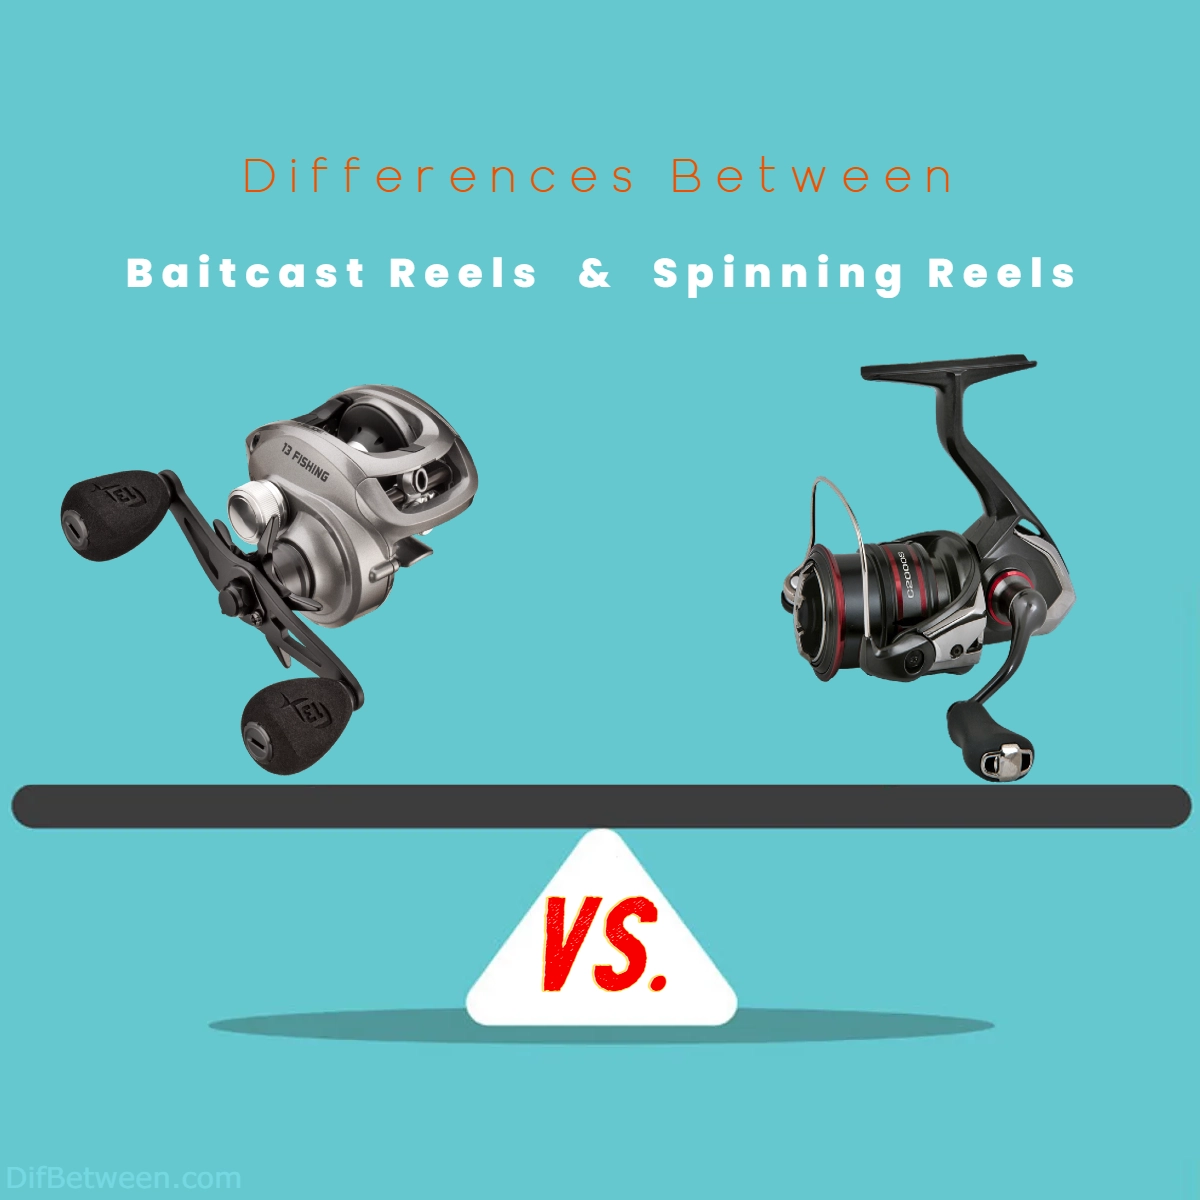 Difference Between Baitcast and Spinning Reels